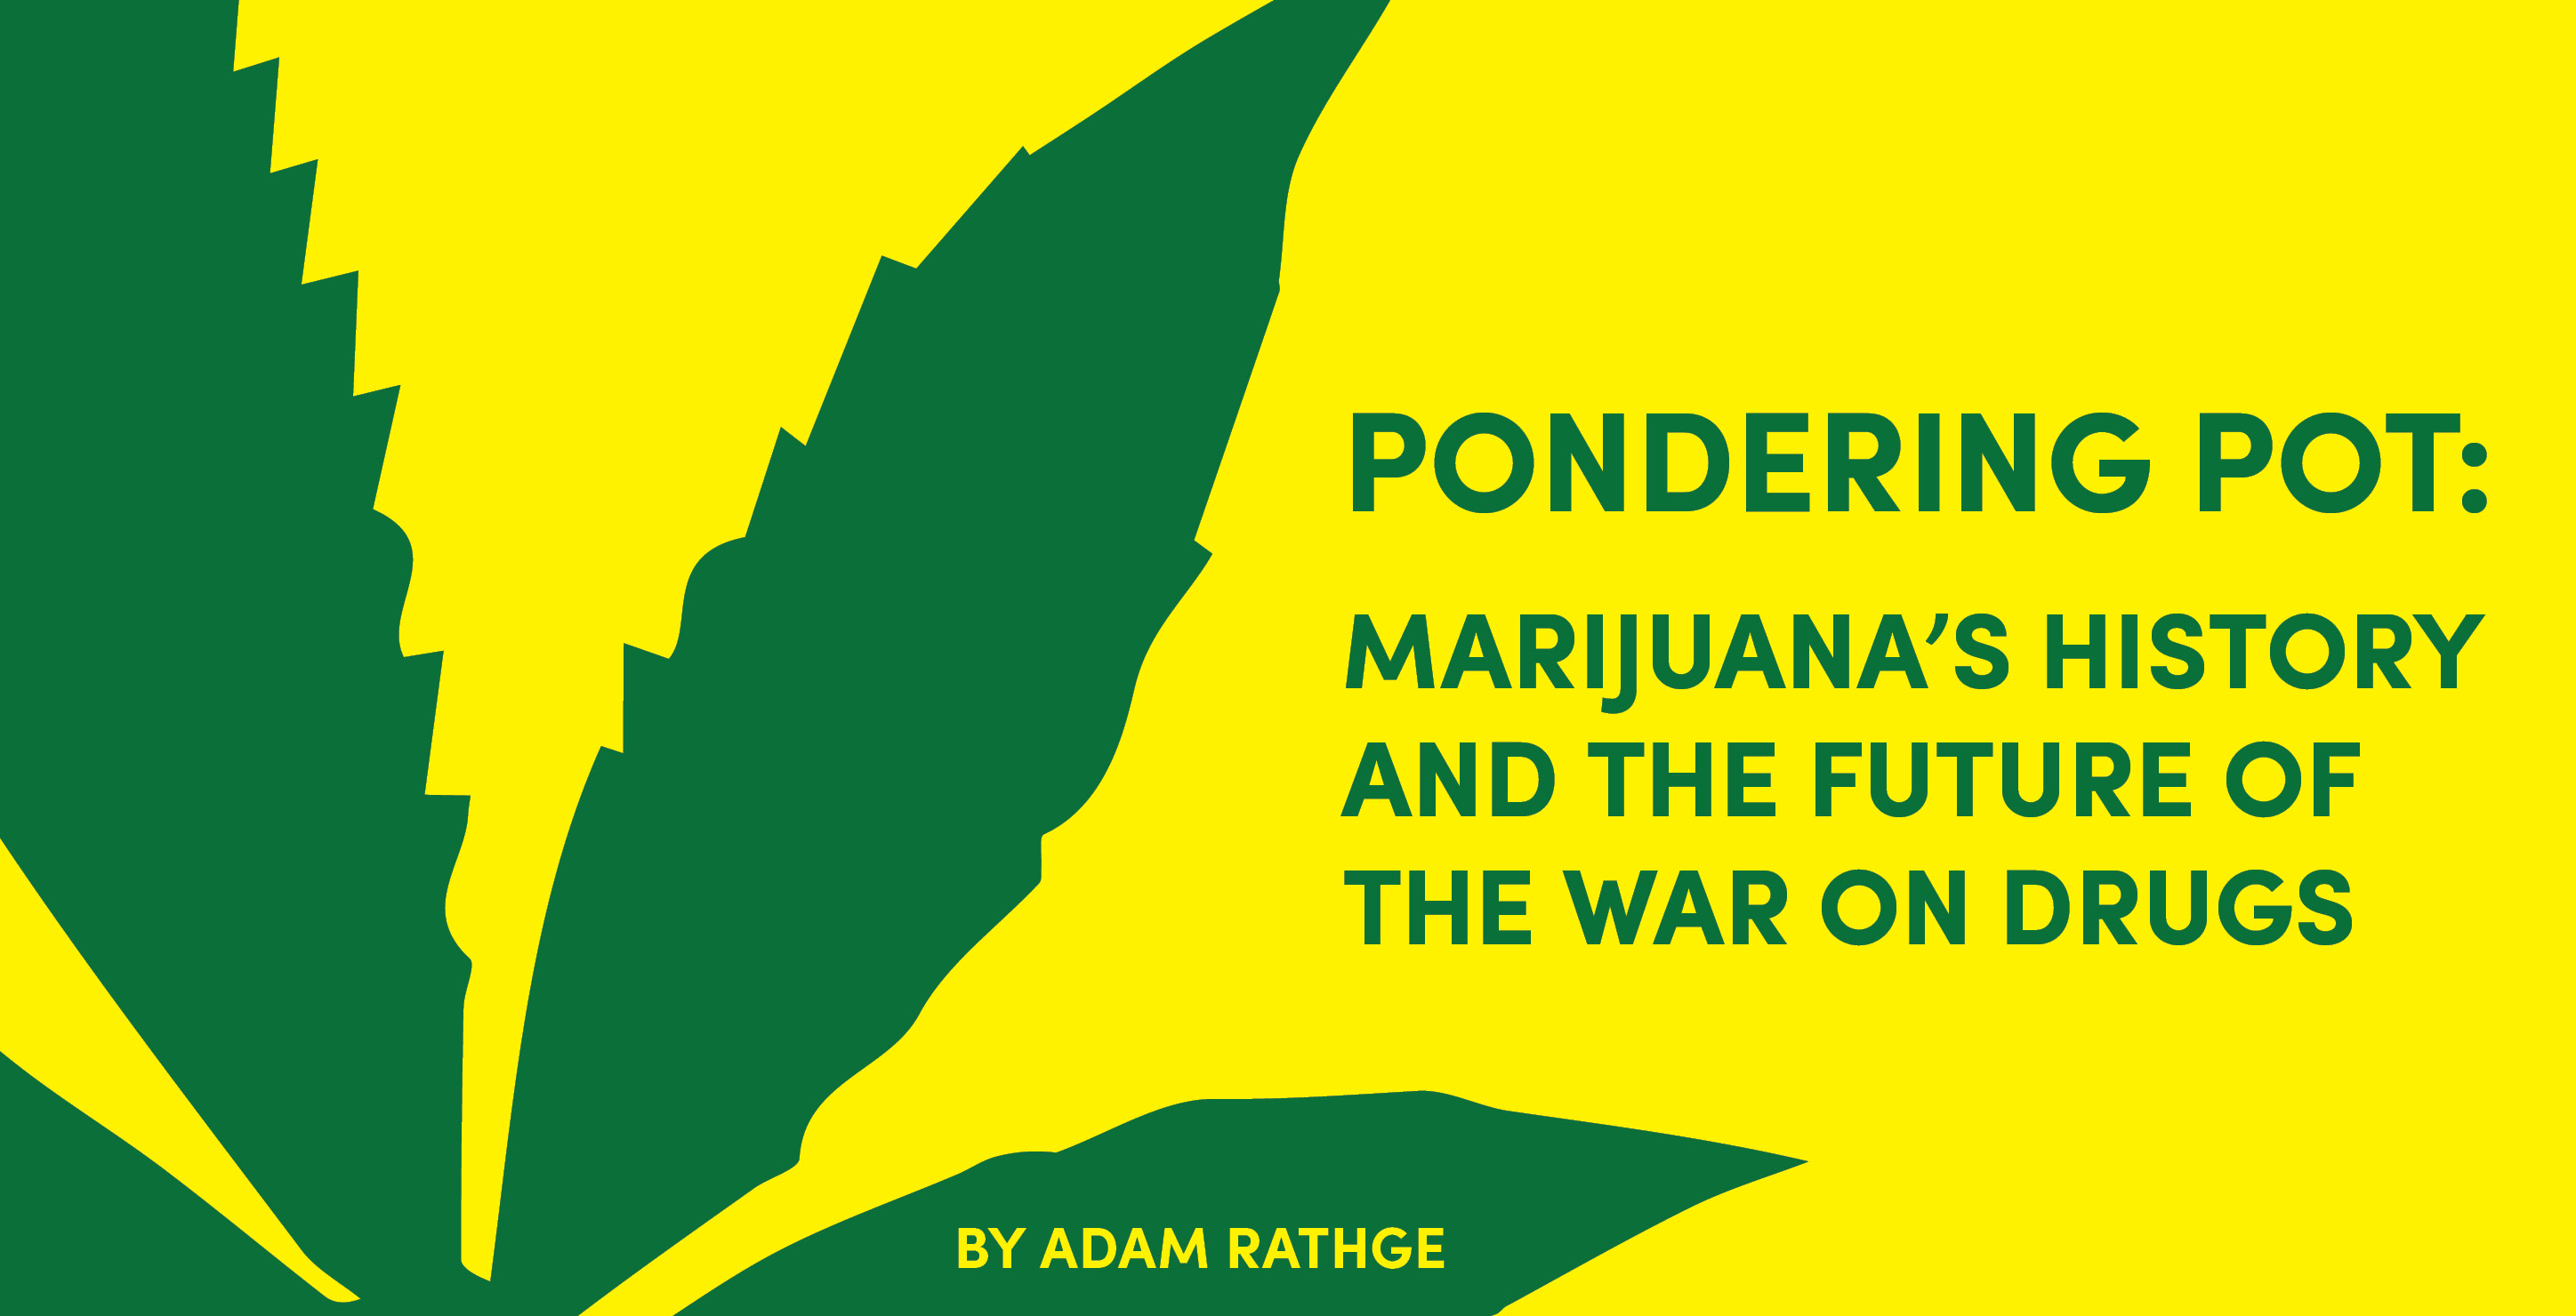 The cover of Rathge's Pondering Pot, which is a yellow background with a green marijuana leaf and green text